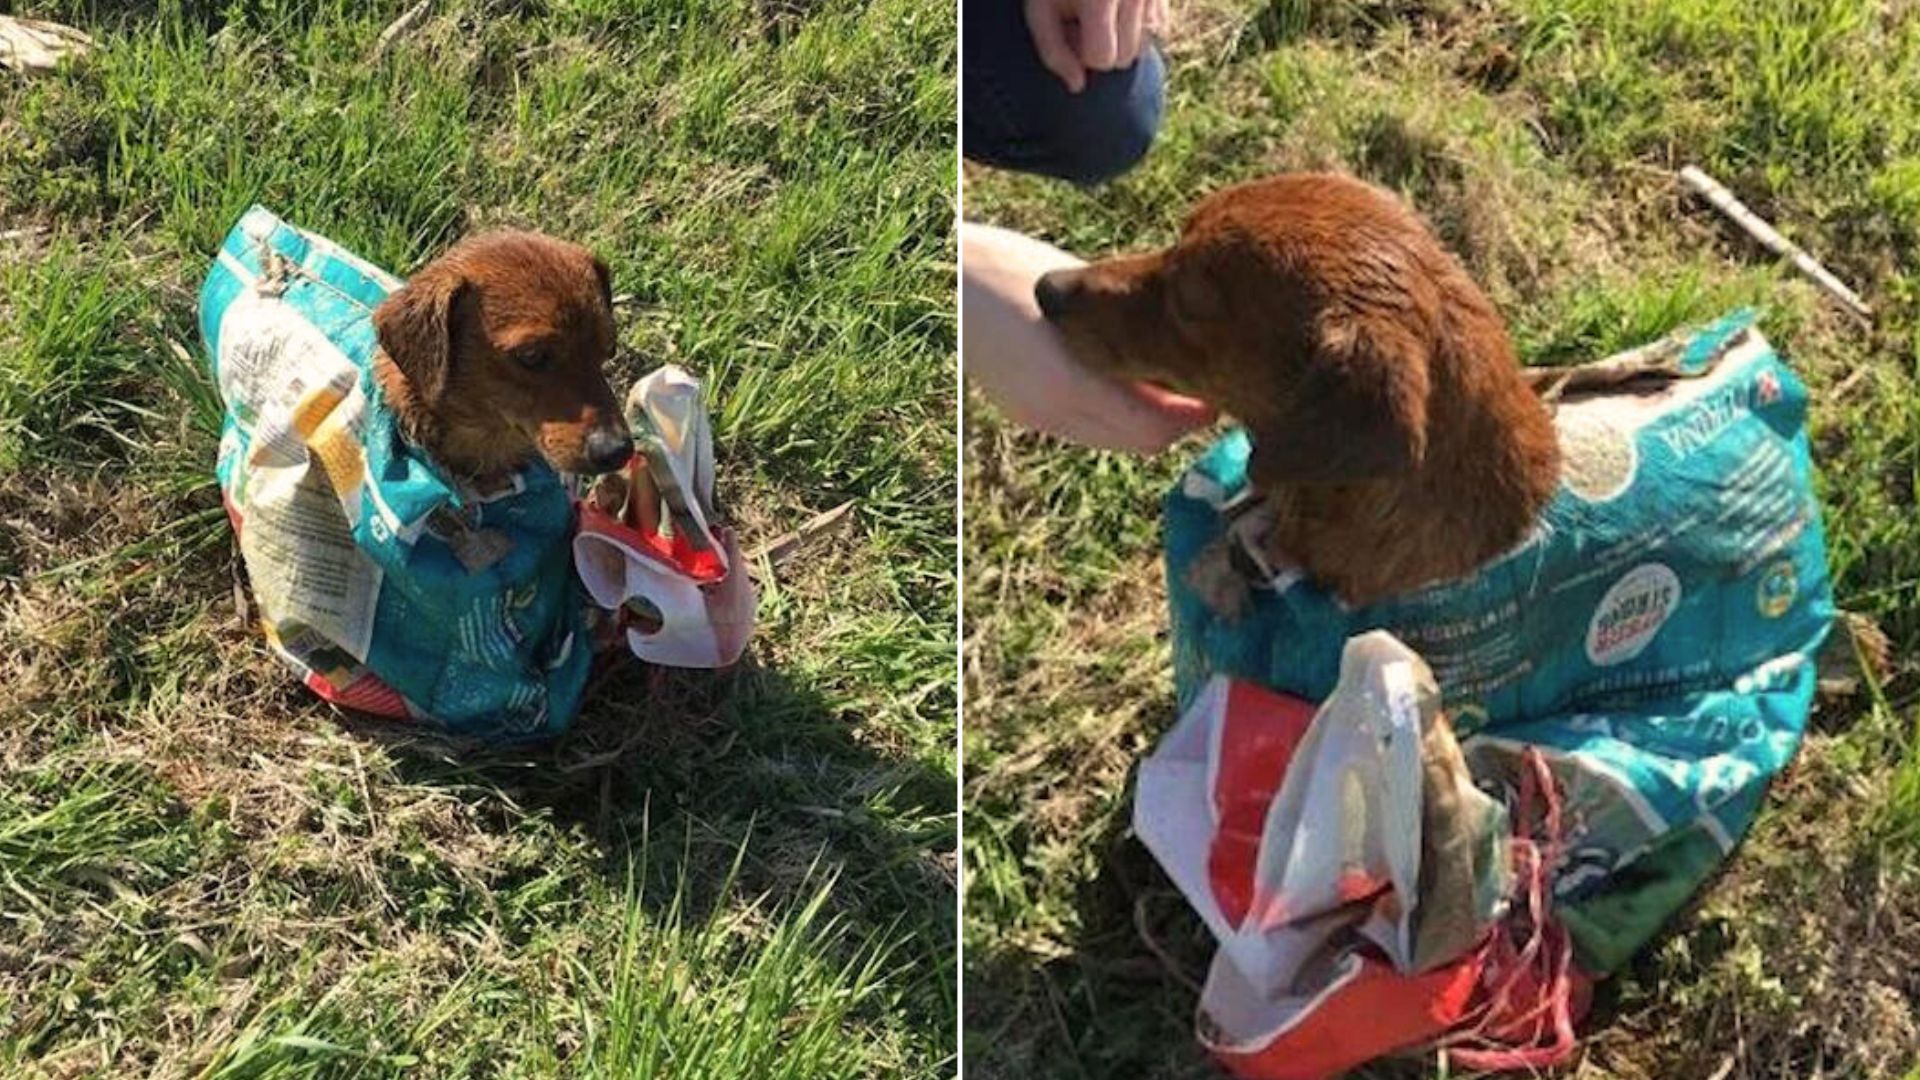 Couple Saved Tiny Dog Tied Up In Sack But What They Found Out Next Left Them In Shock